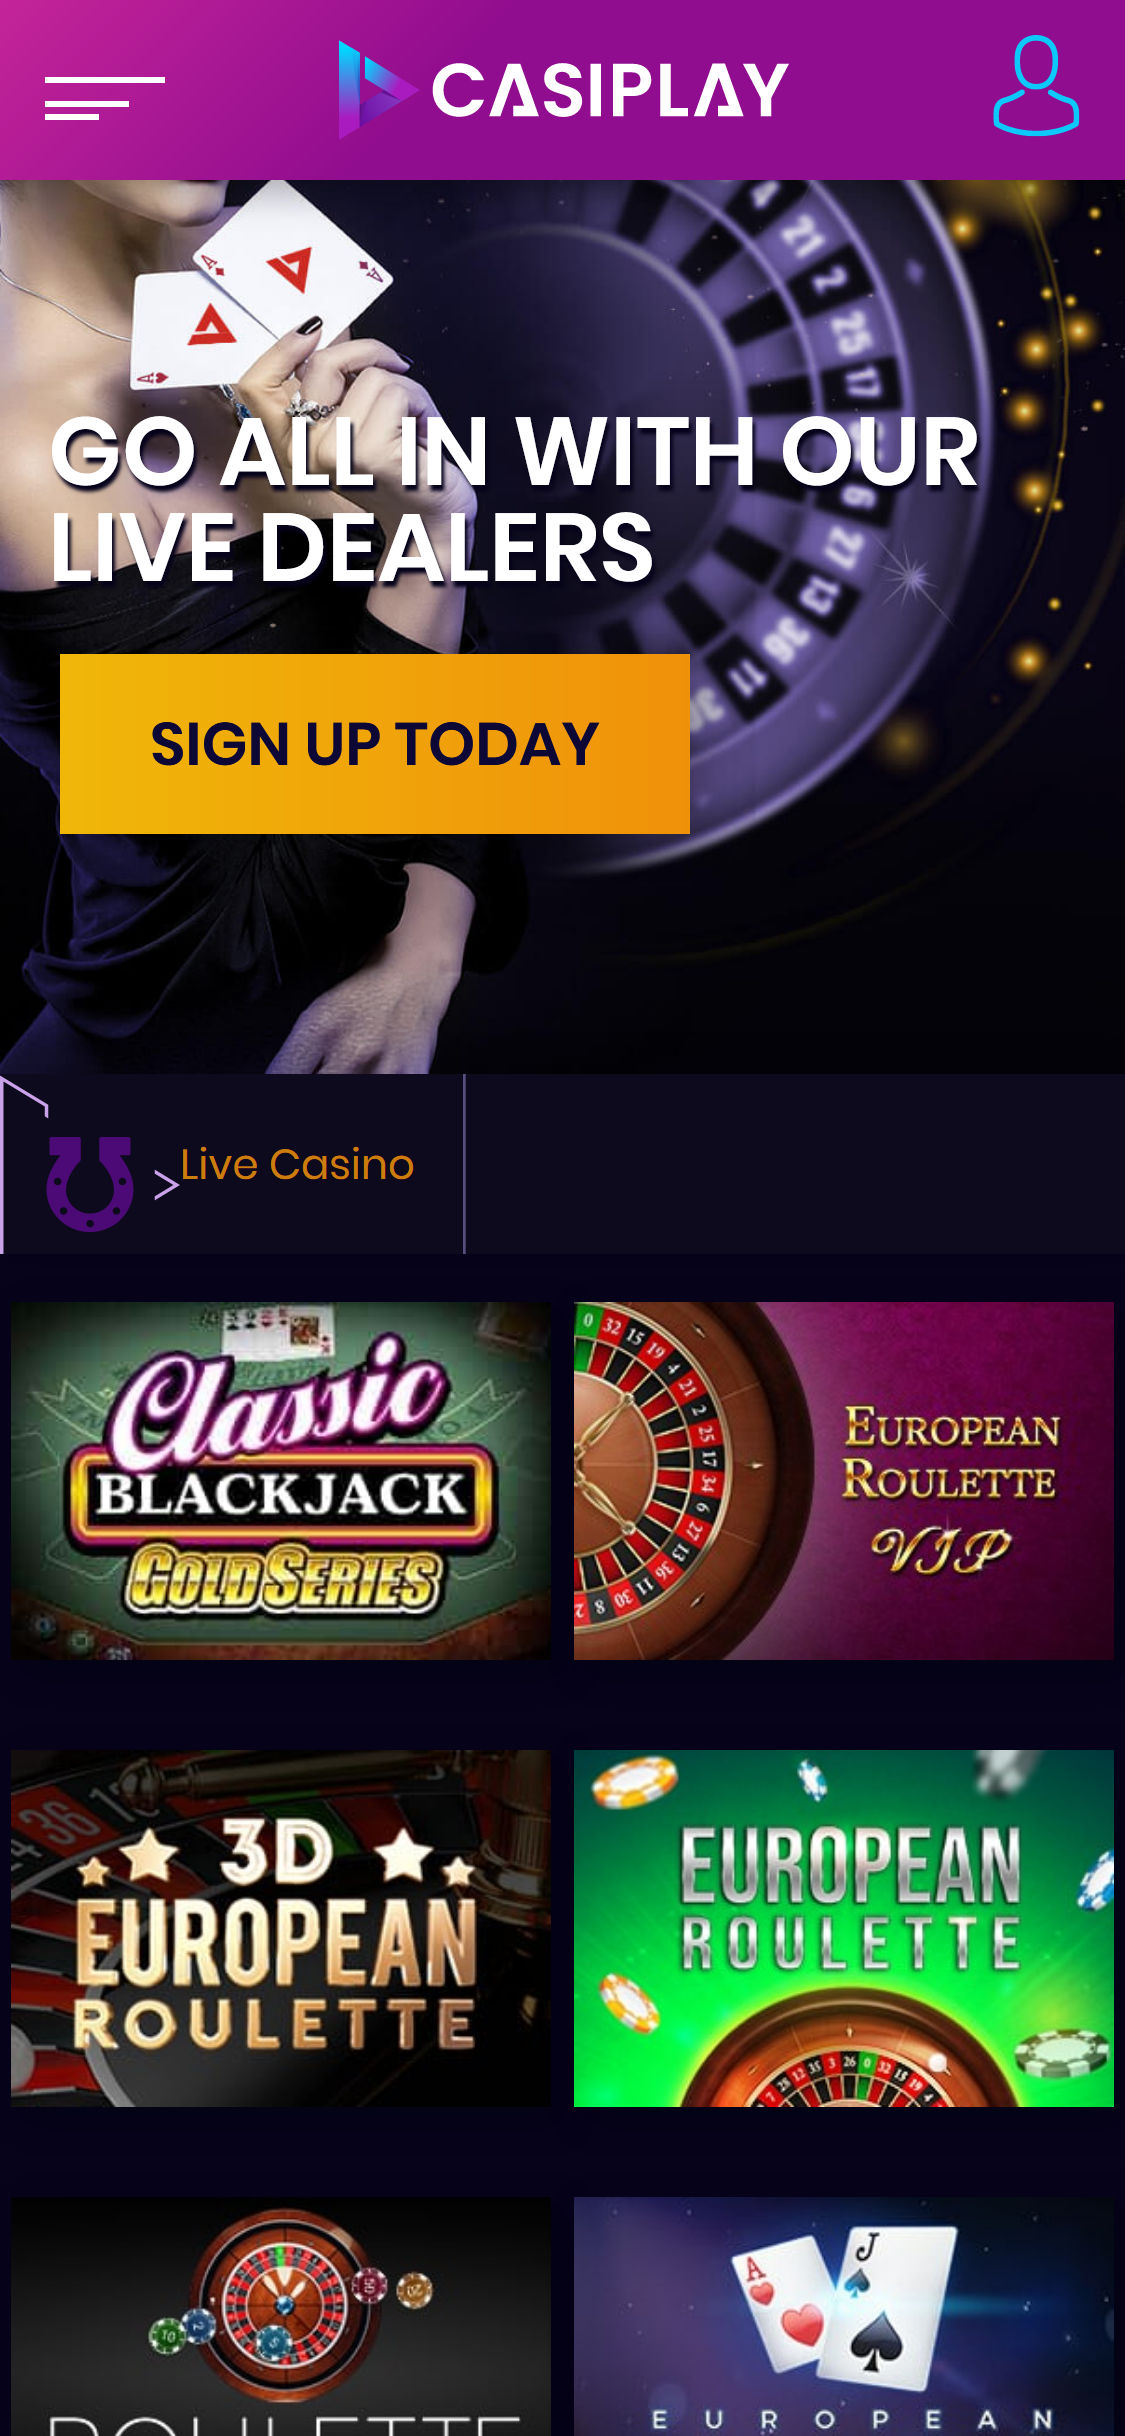 Casiplay Casino Mobile Live Dealer Games Review